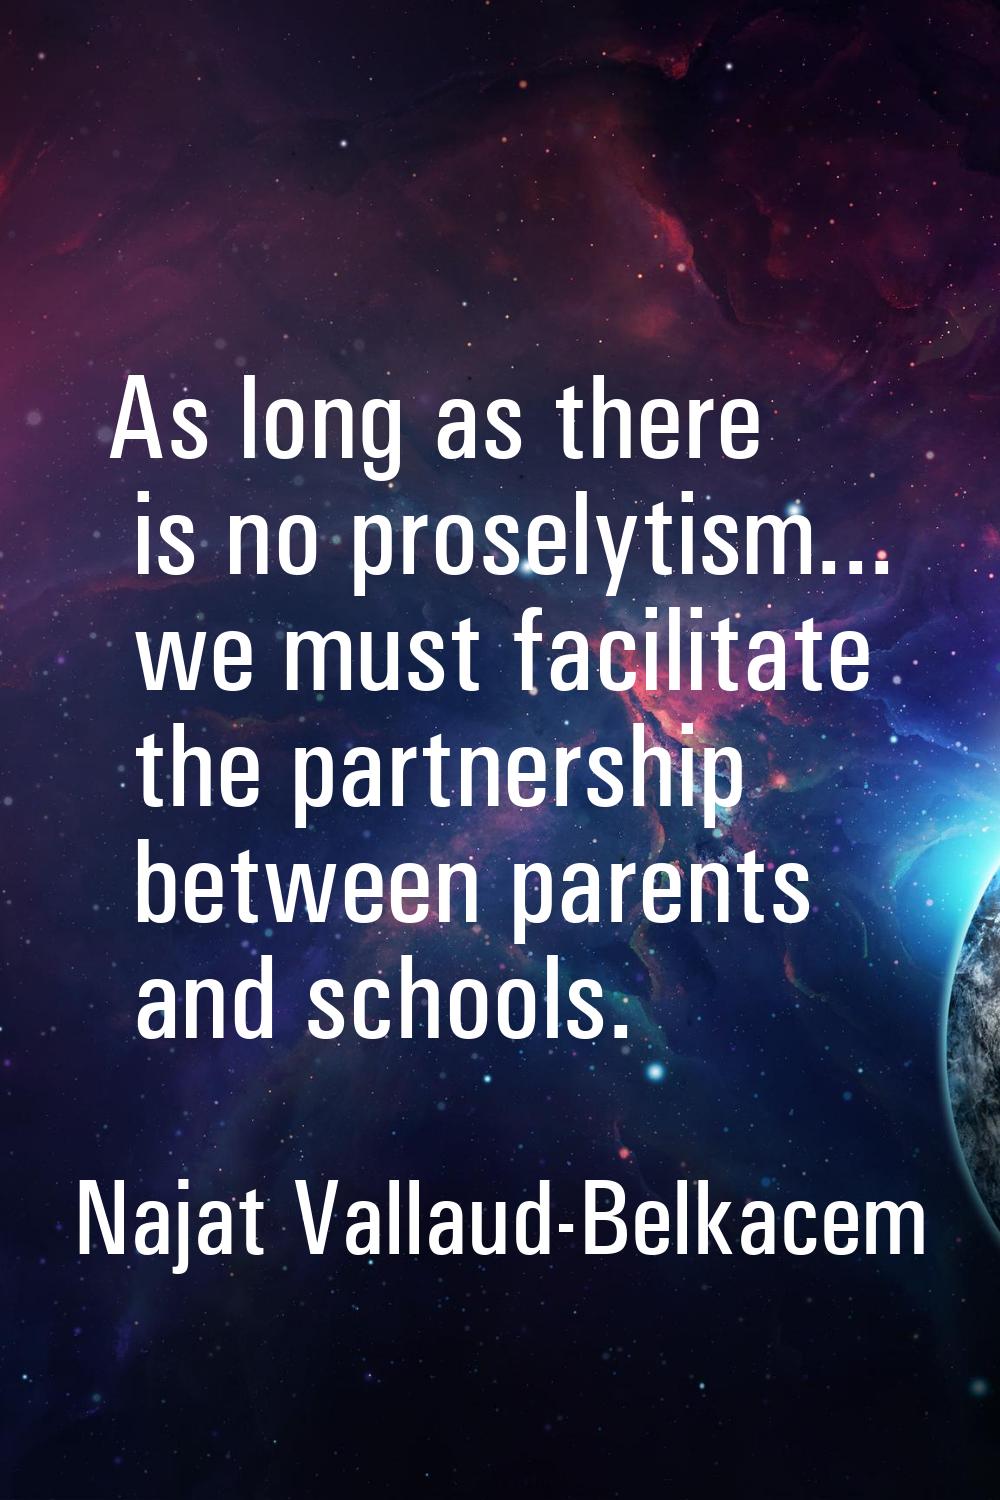 As long as there is no proselytism... we must facilitate the partnership between parents and school